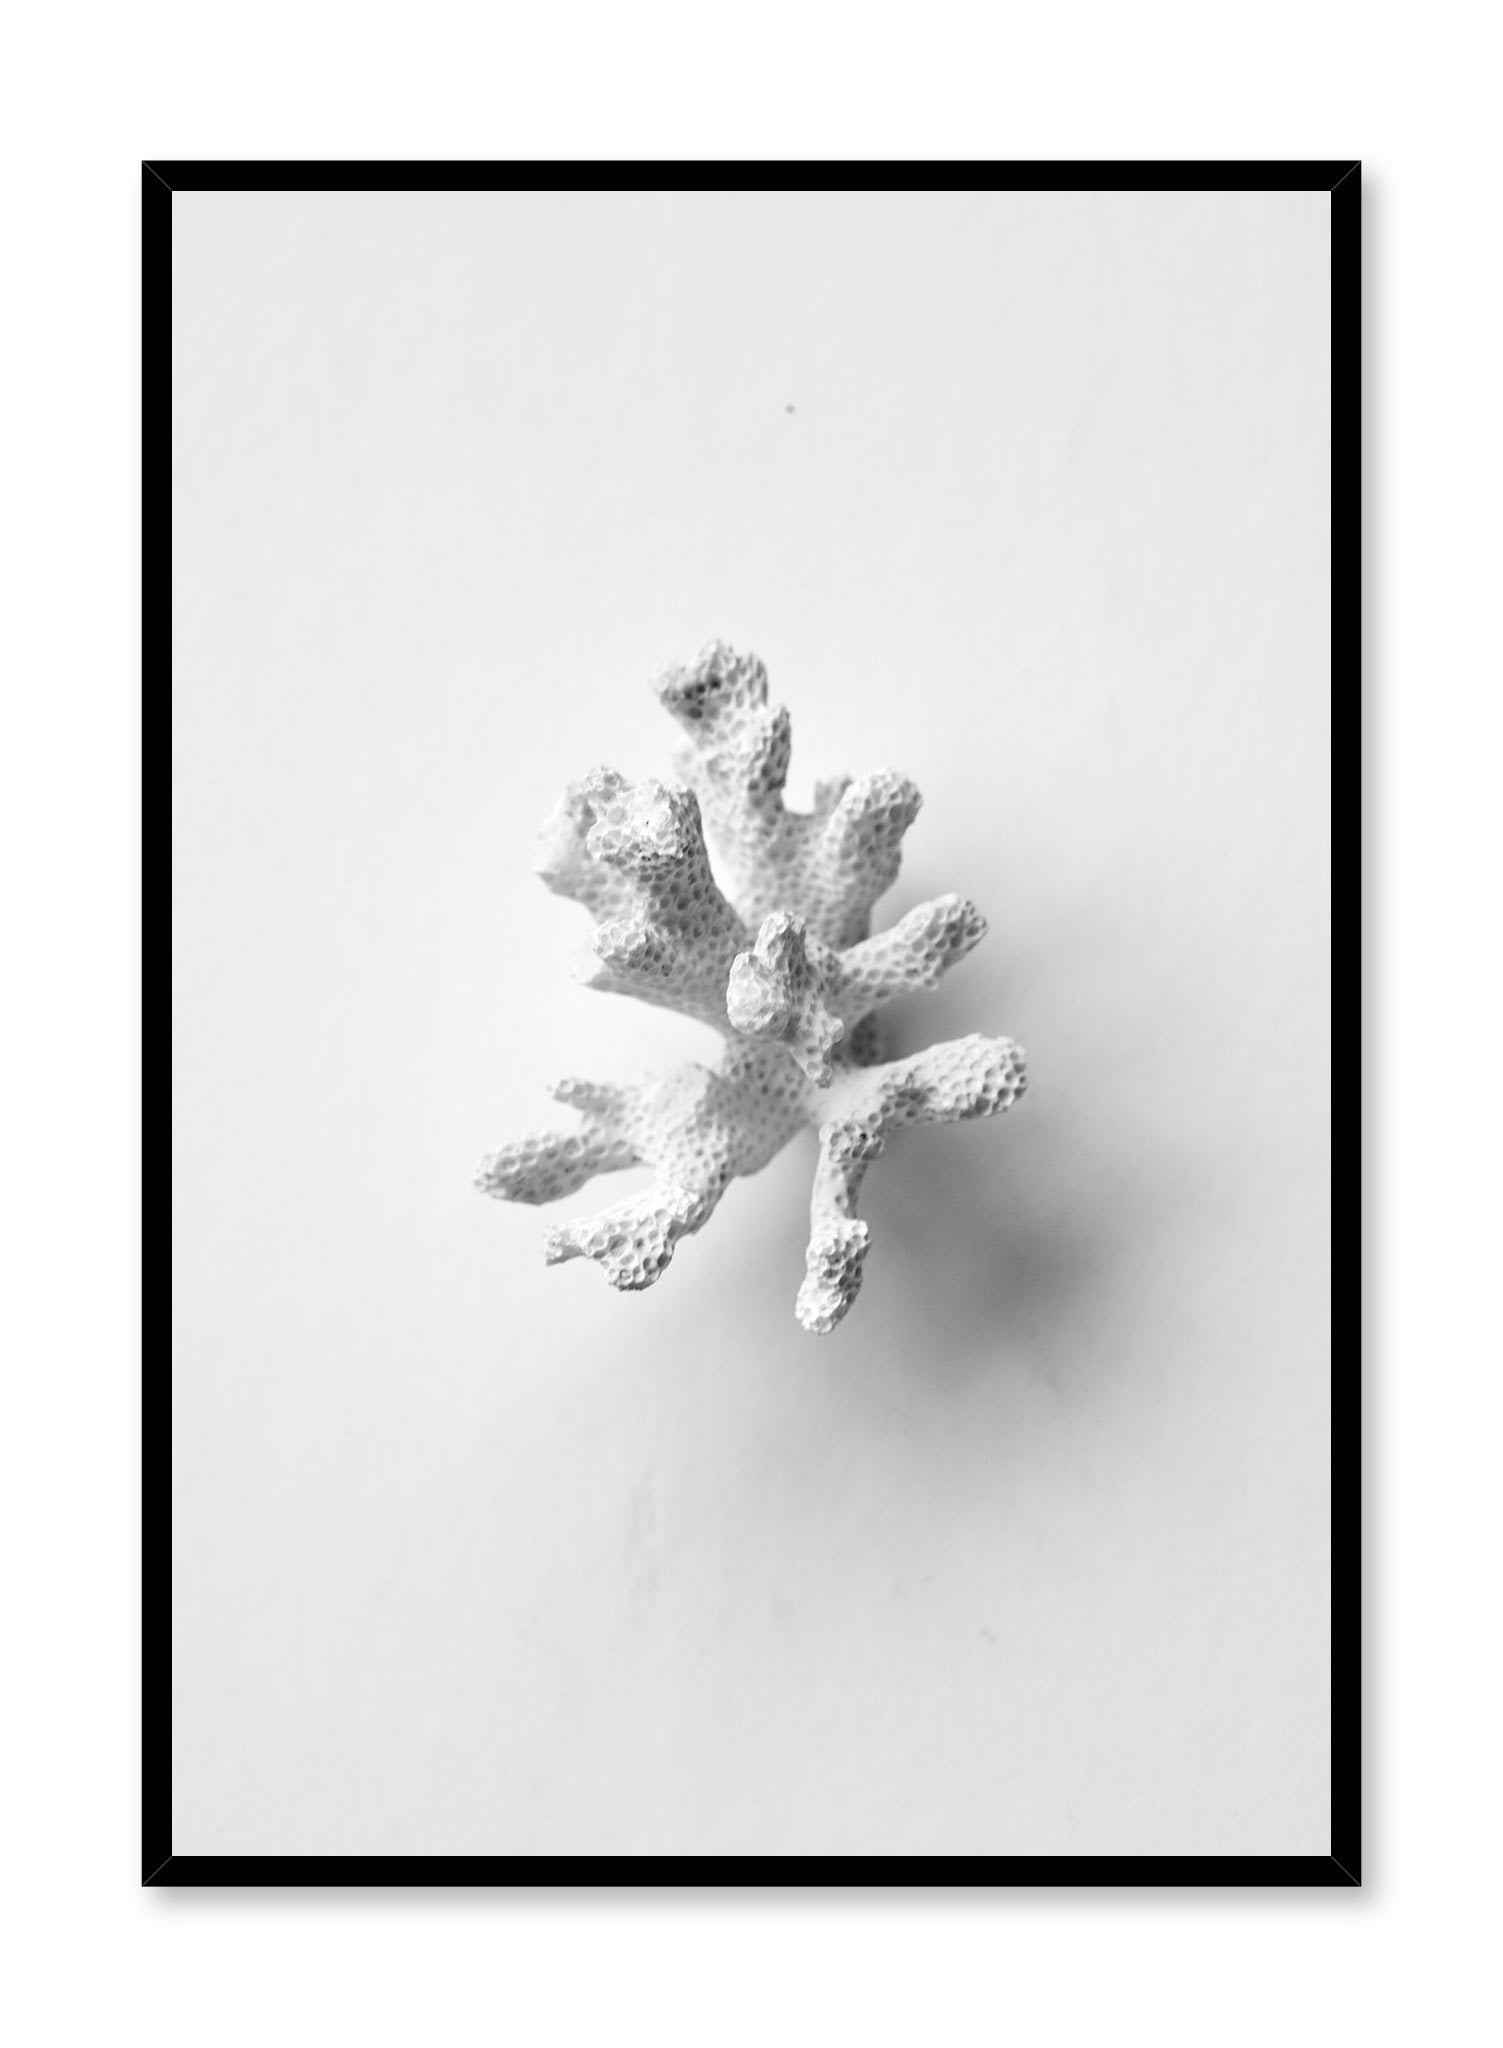 Coral Sprig is a minimalist photography of a close-up shot of a white coral sprig by Opposite Wall.